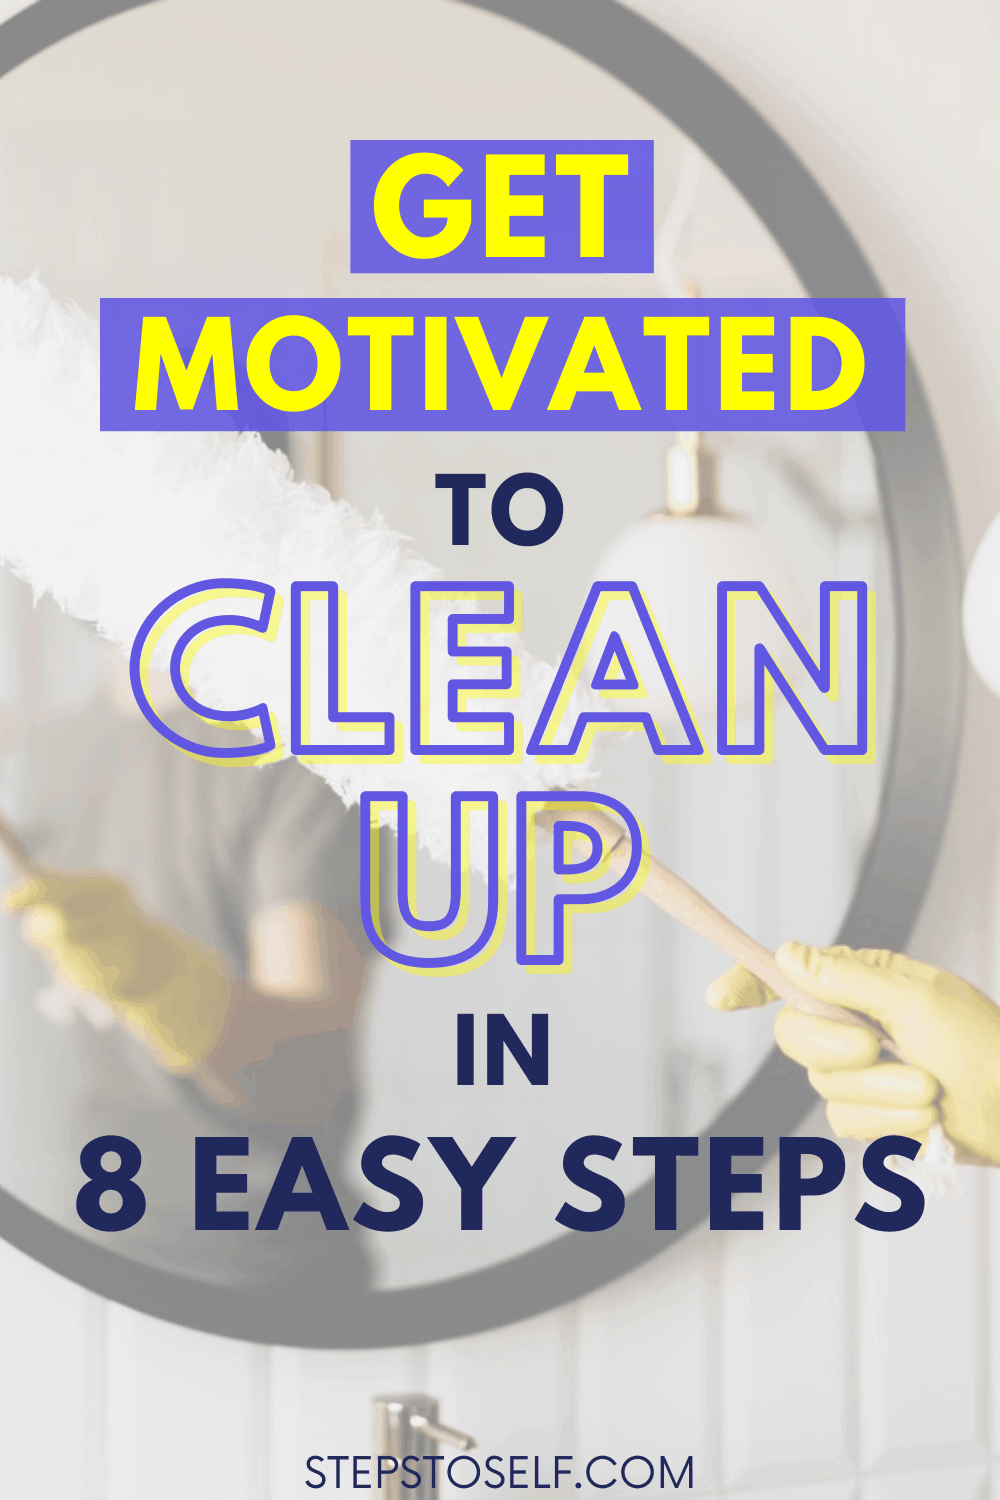 Get motivated to clean up in 8 easy steps